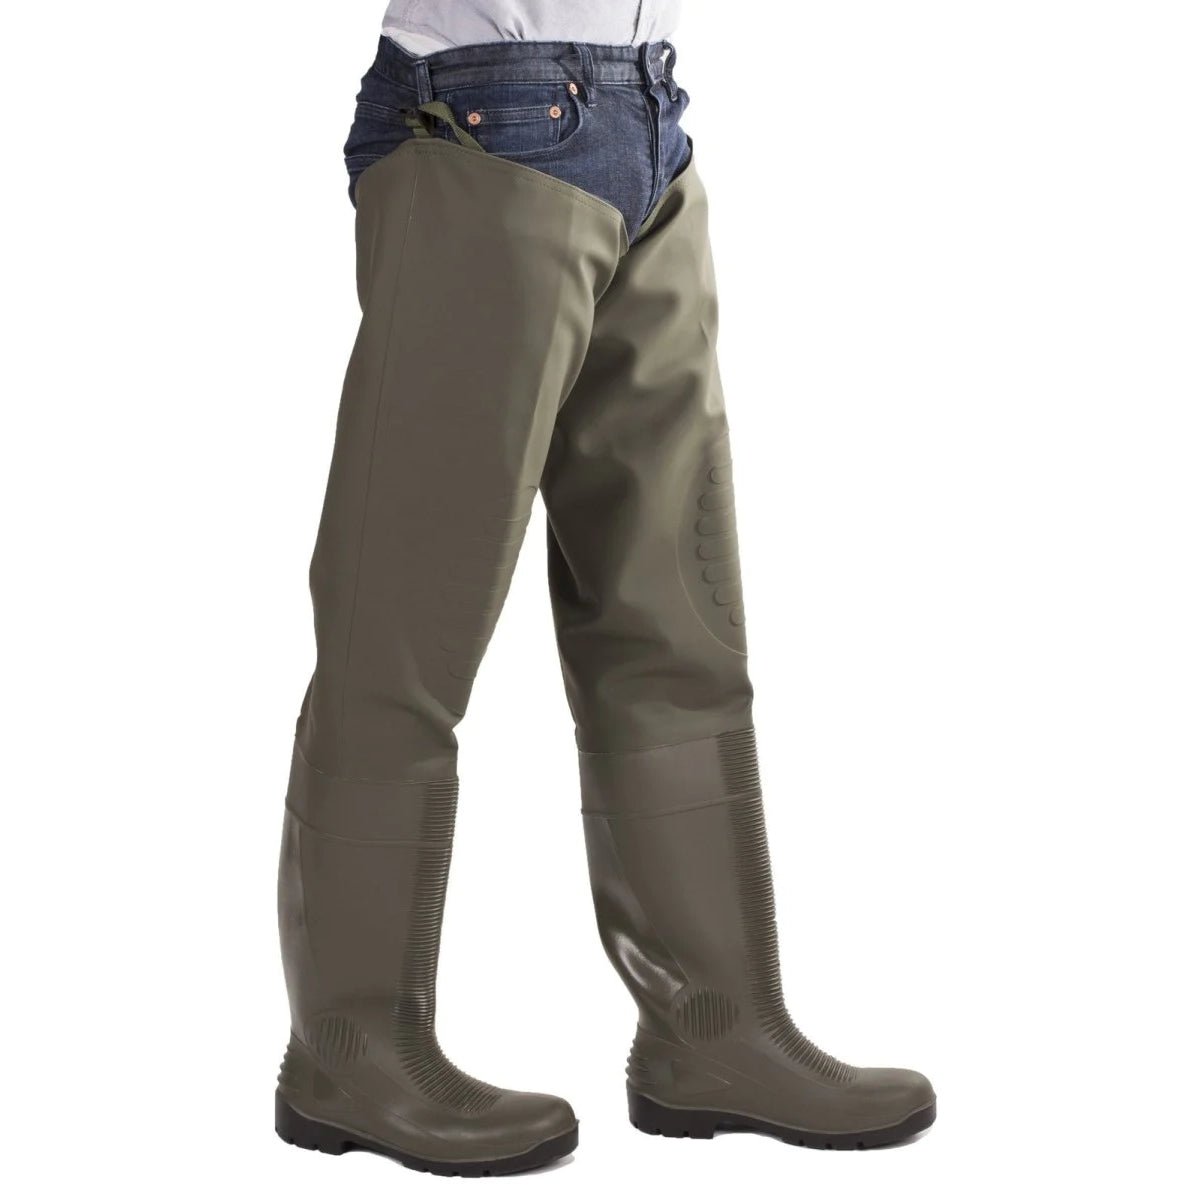 Amblers Forth Thigh Waterproof Safety Waders - Shoe Store Direct